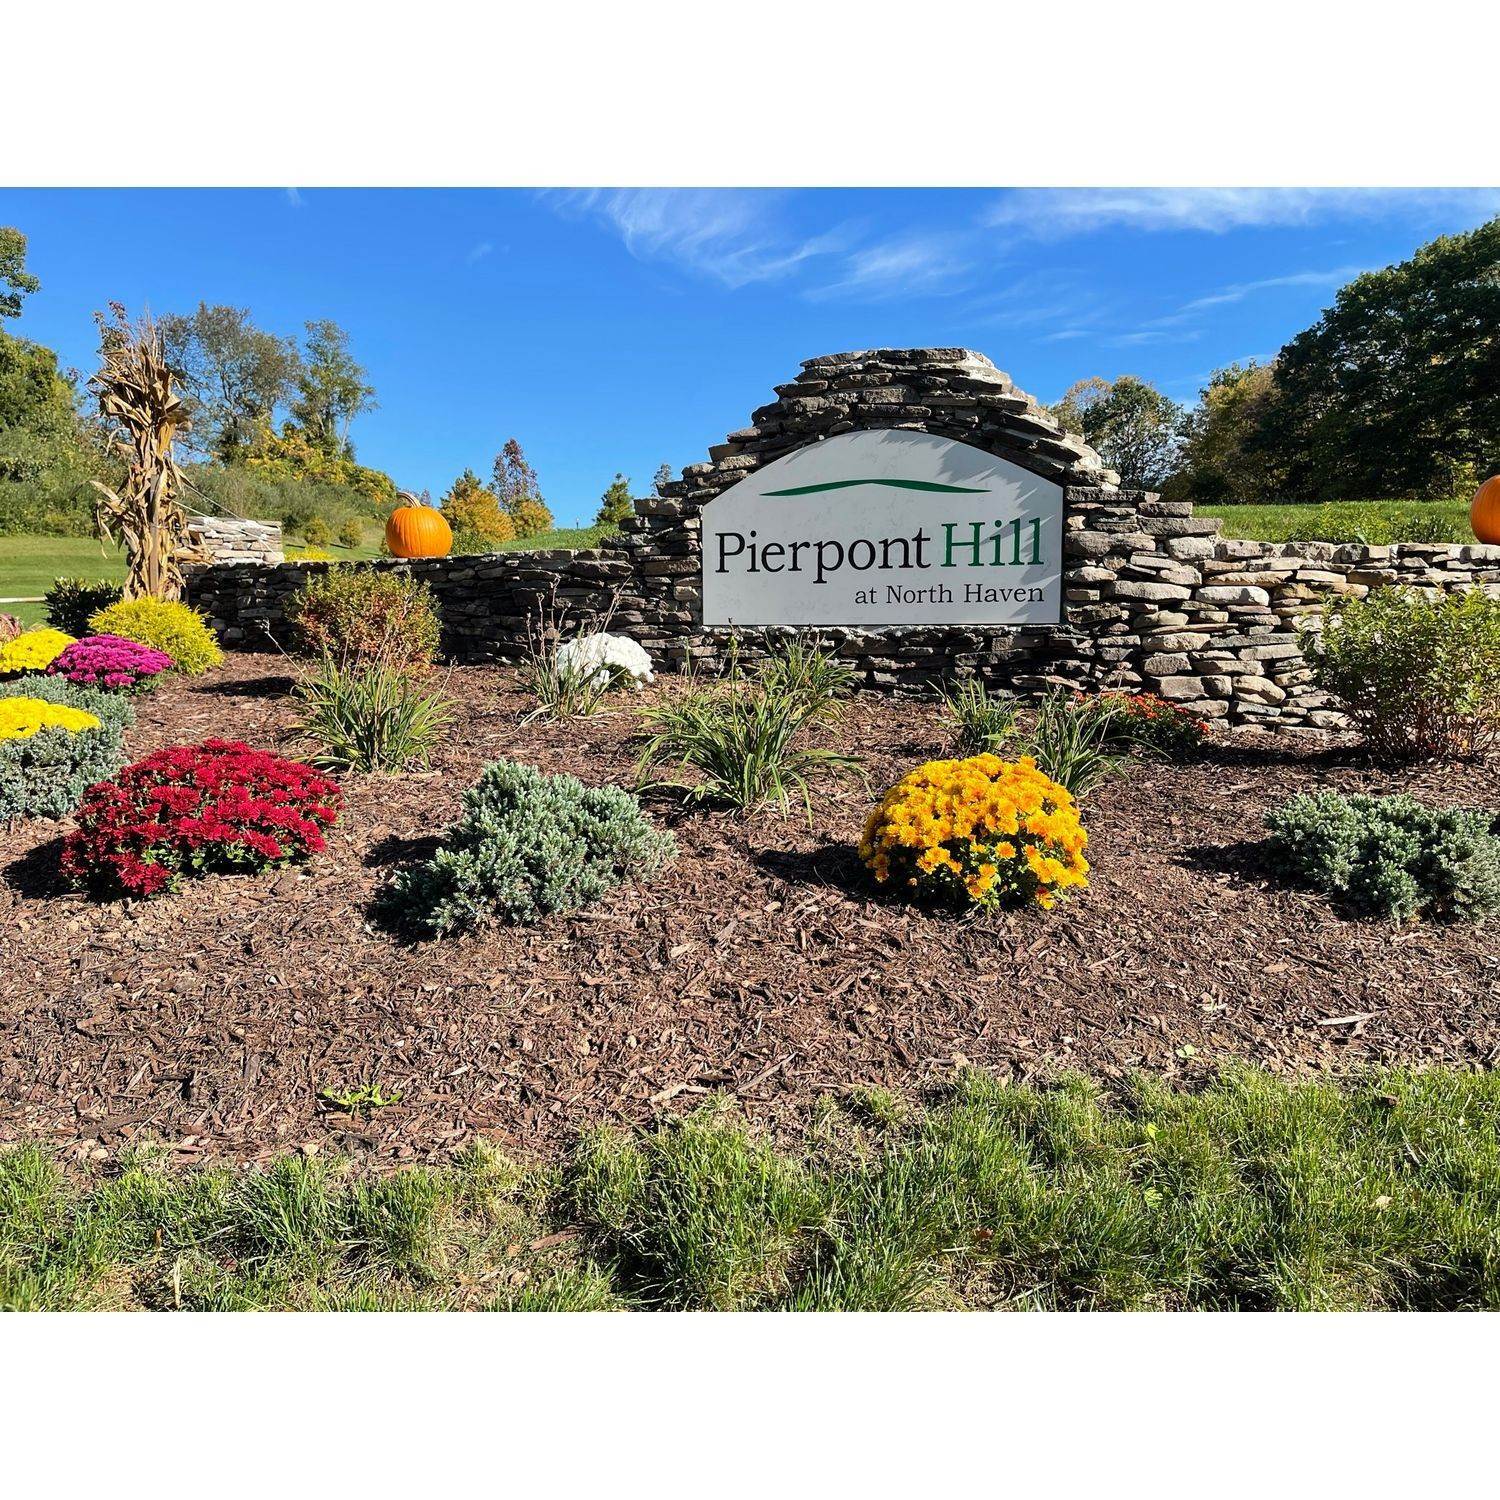 15. Pierpont Hill at North Haven建於 141 Half Mile Road, North Haven, CT 06473